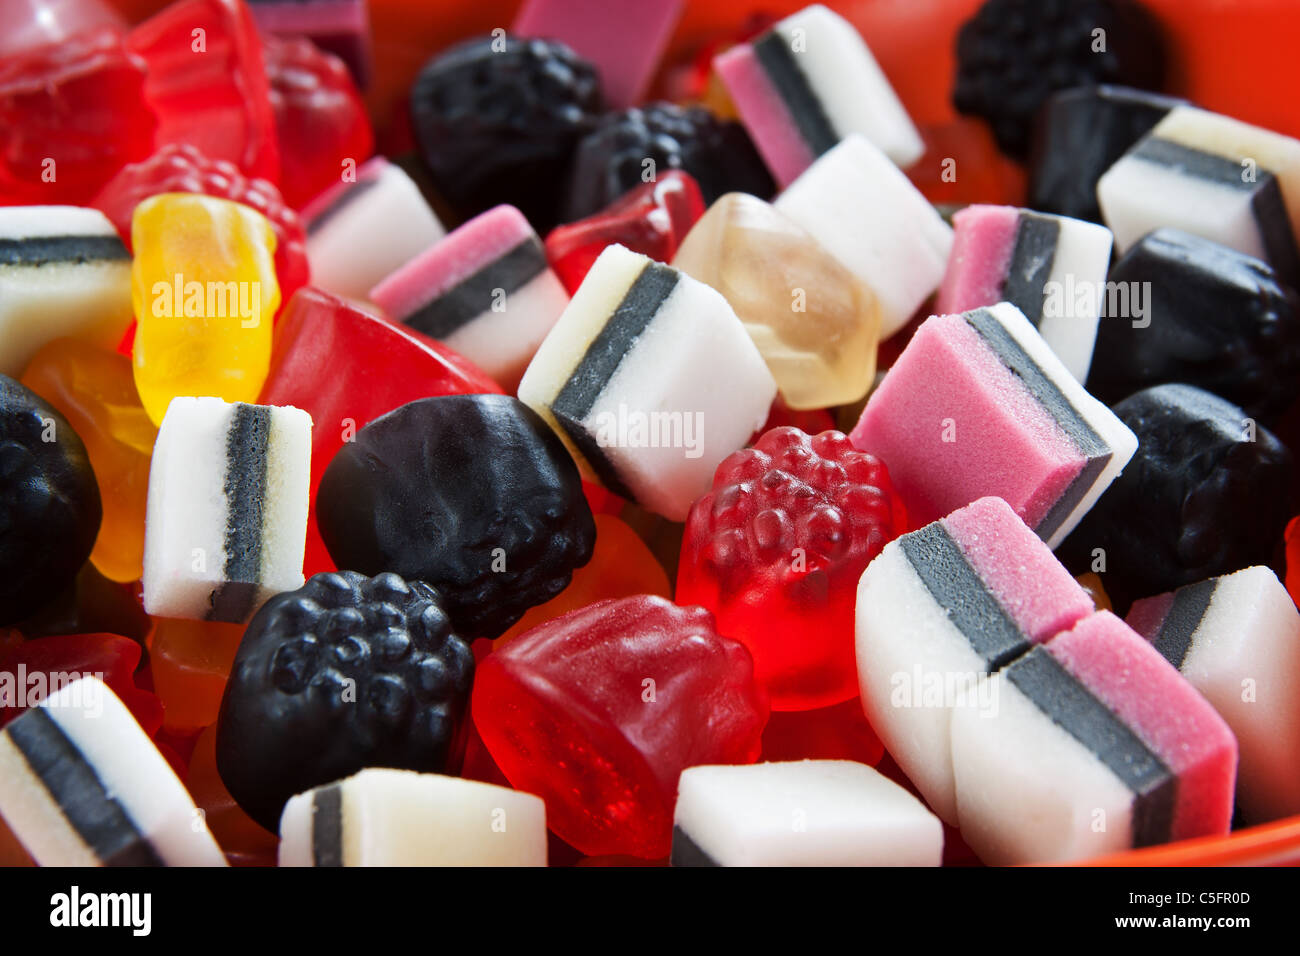 Candy jelly with various shape and taste Stock Photo